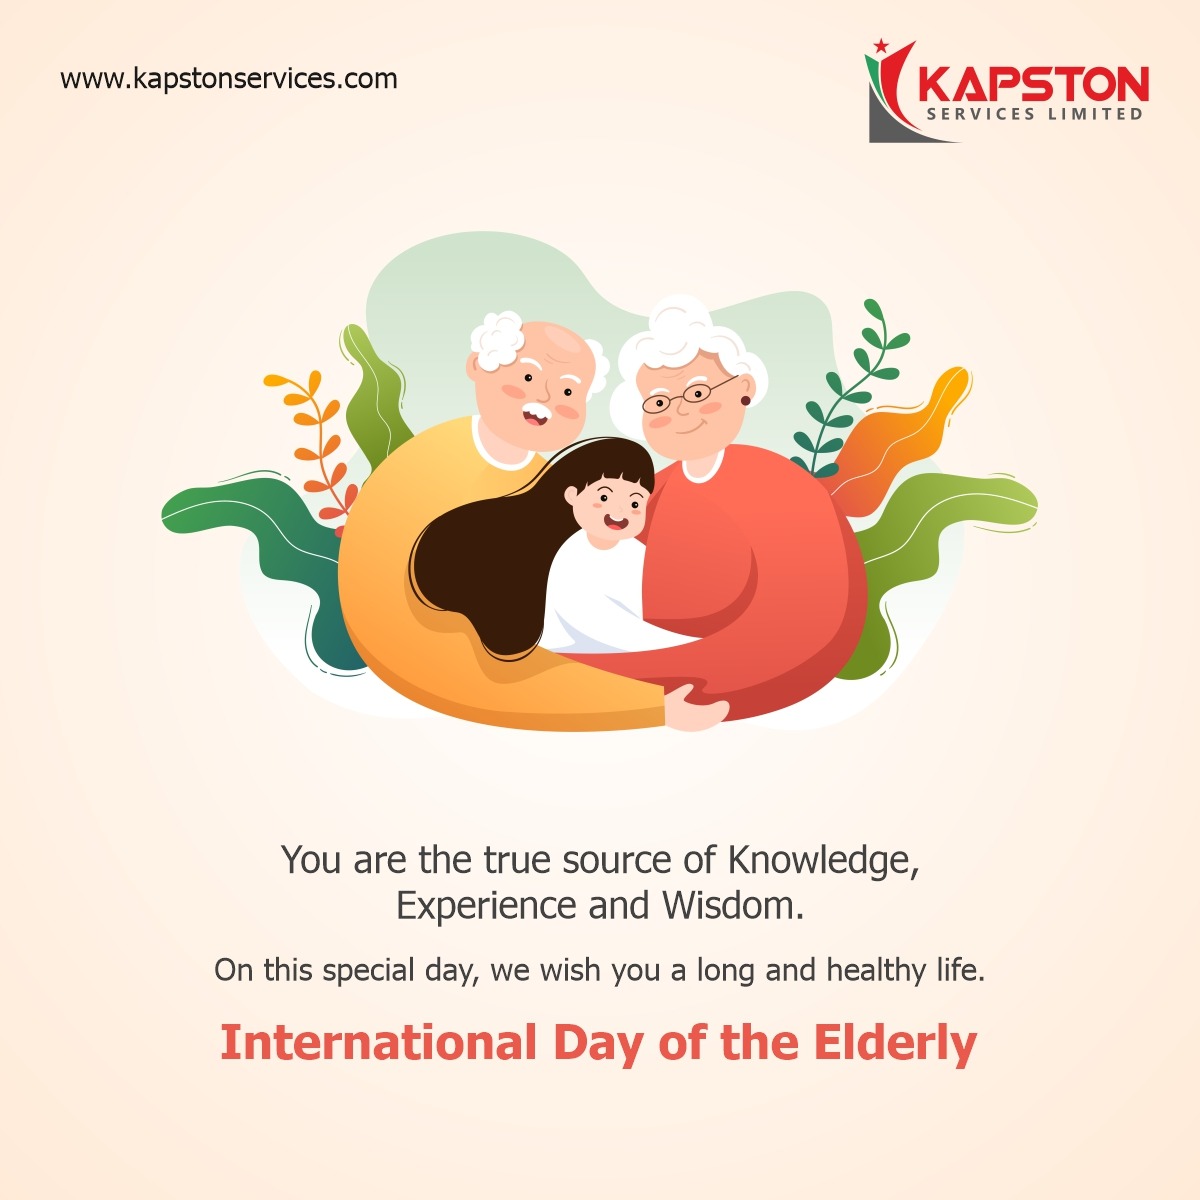 On international day for the elderly, we wish our real source of experience, knowledge and wisdom, a long and healthy life, nurturing the younger generations. #internationaldayofelderly #wisdom #knowledge #experience #life #seniorcitizens #seniorcitizensrock